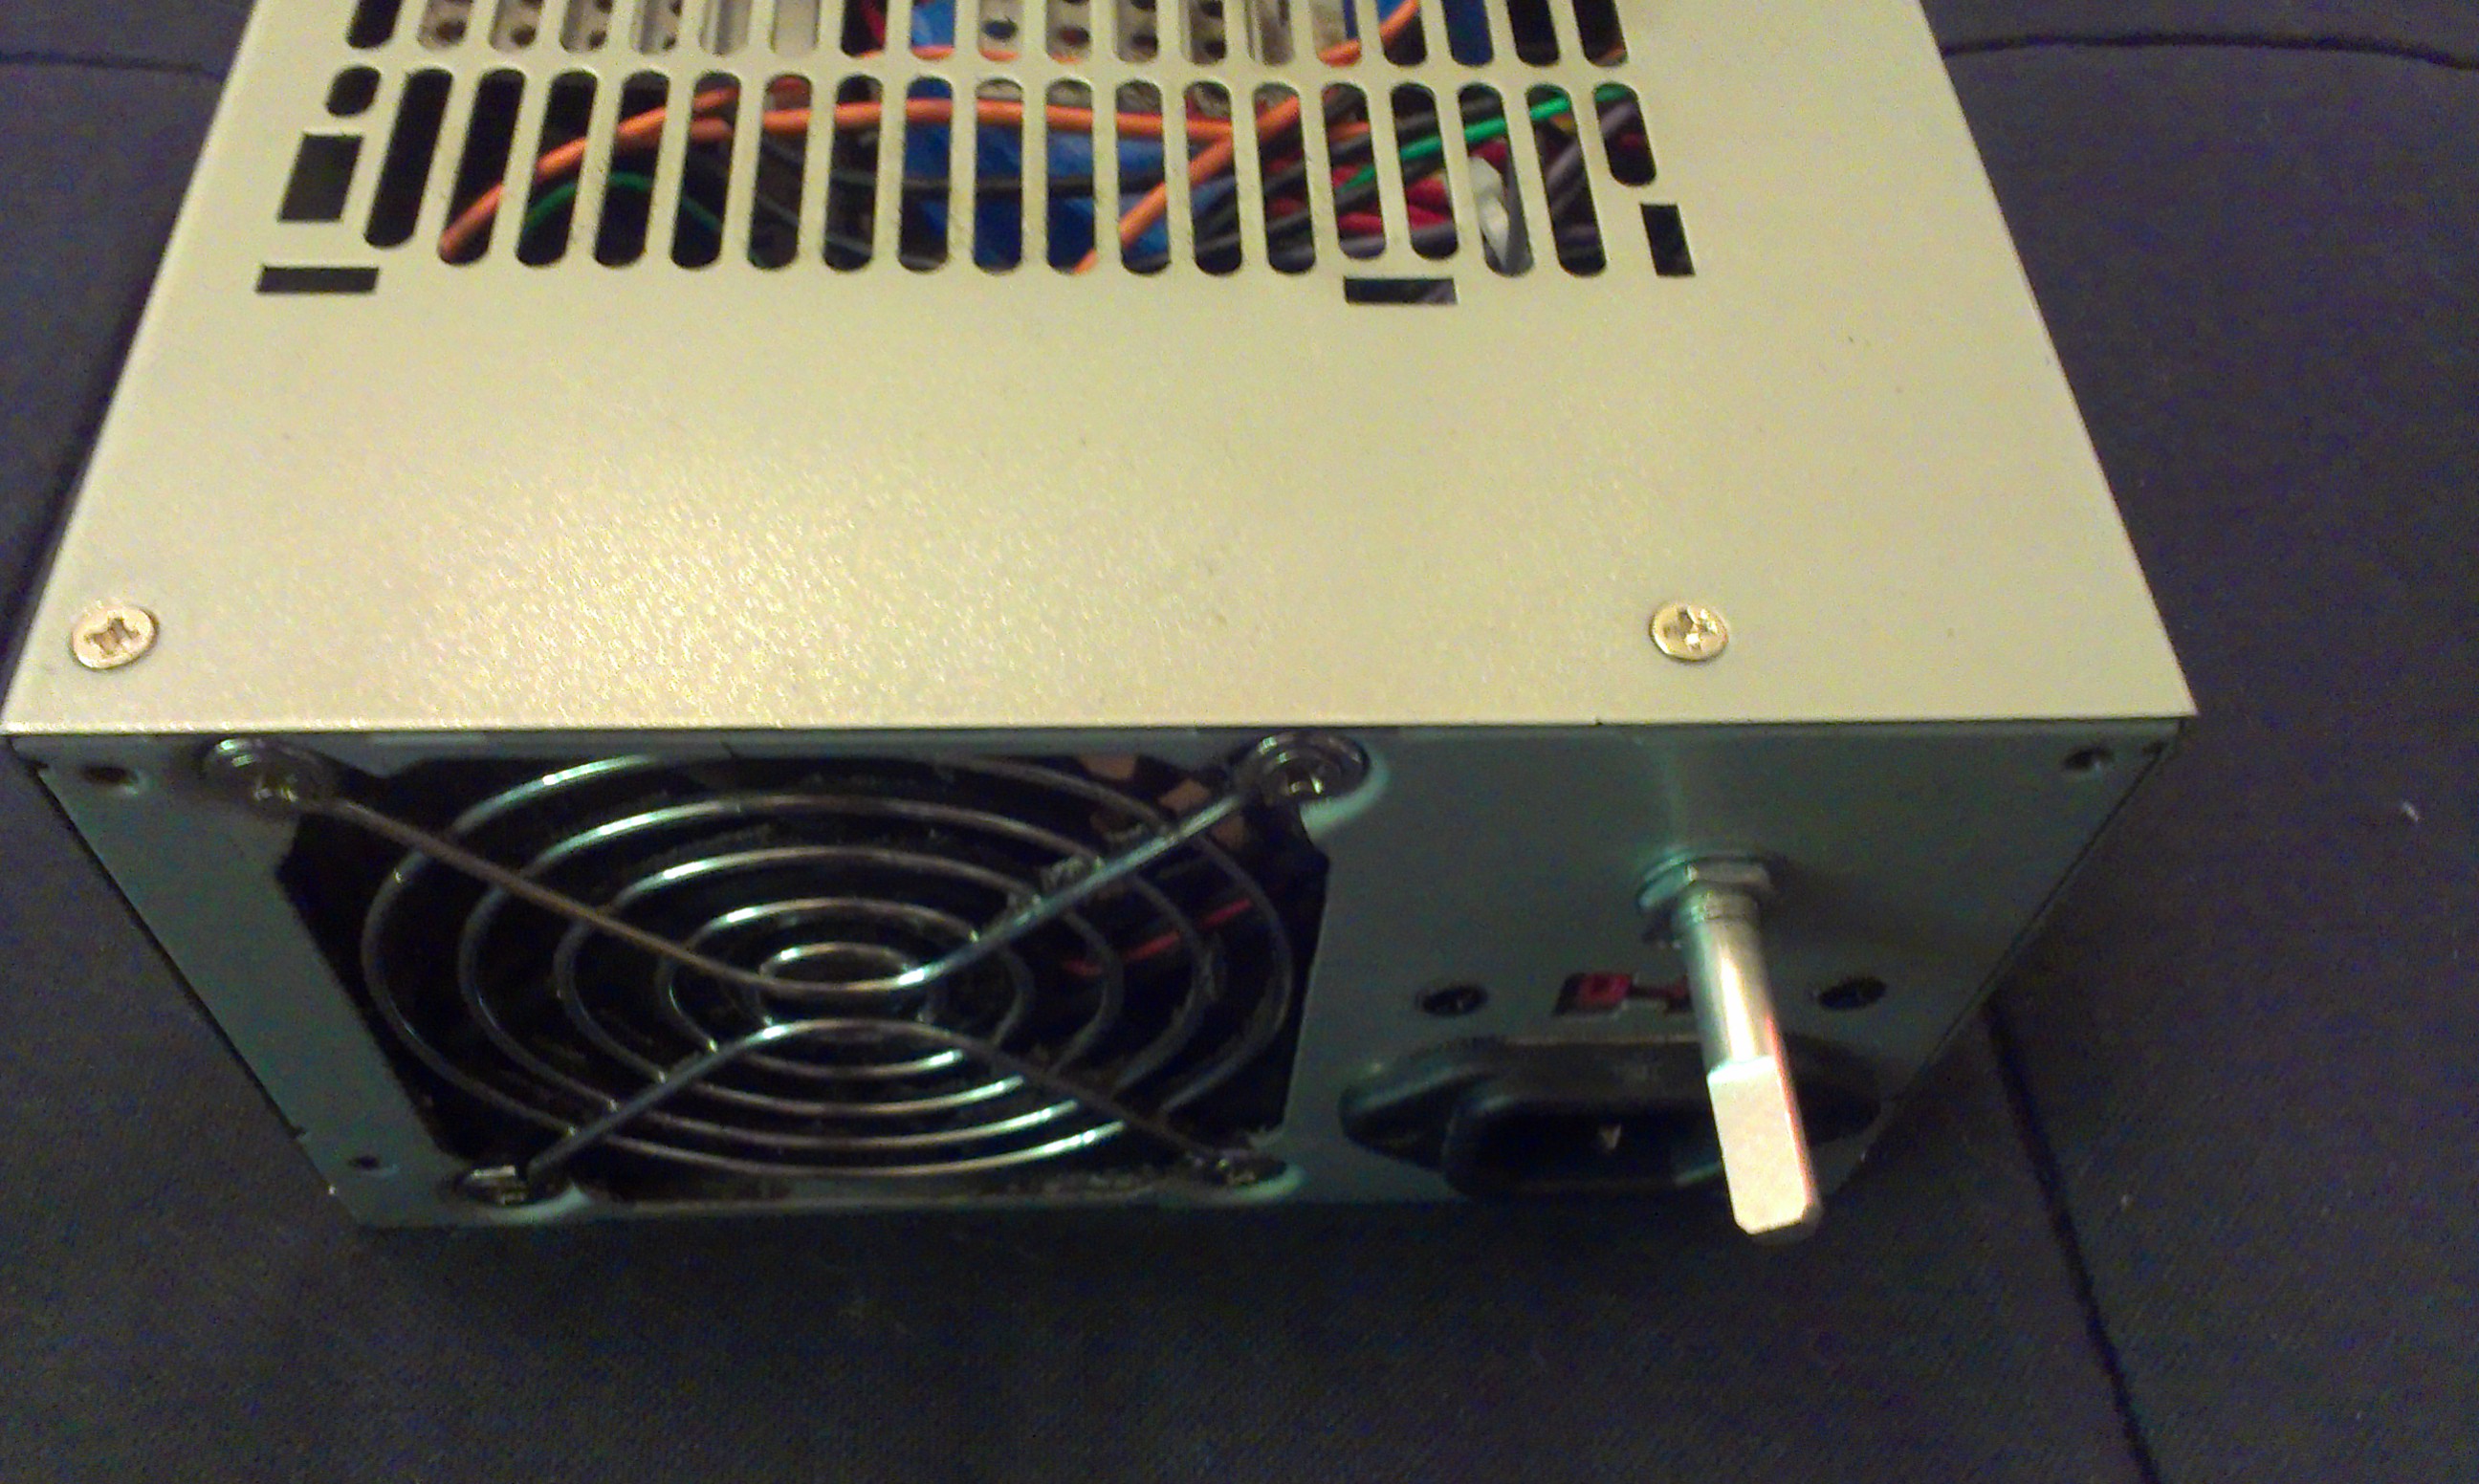 The back of the Hacked PSU with a potentiator for an on switch